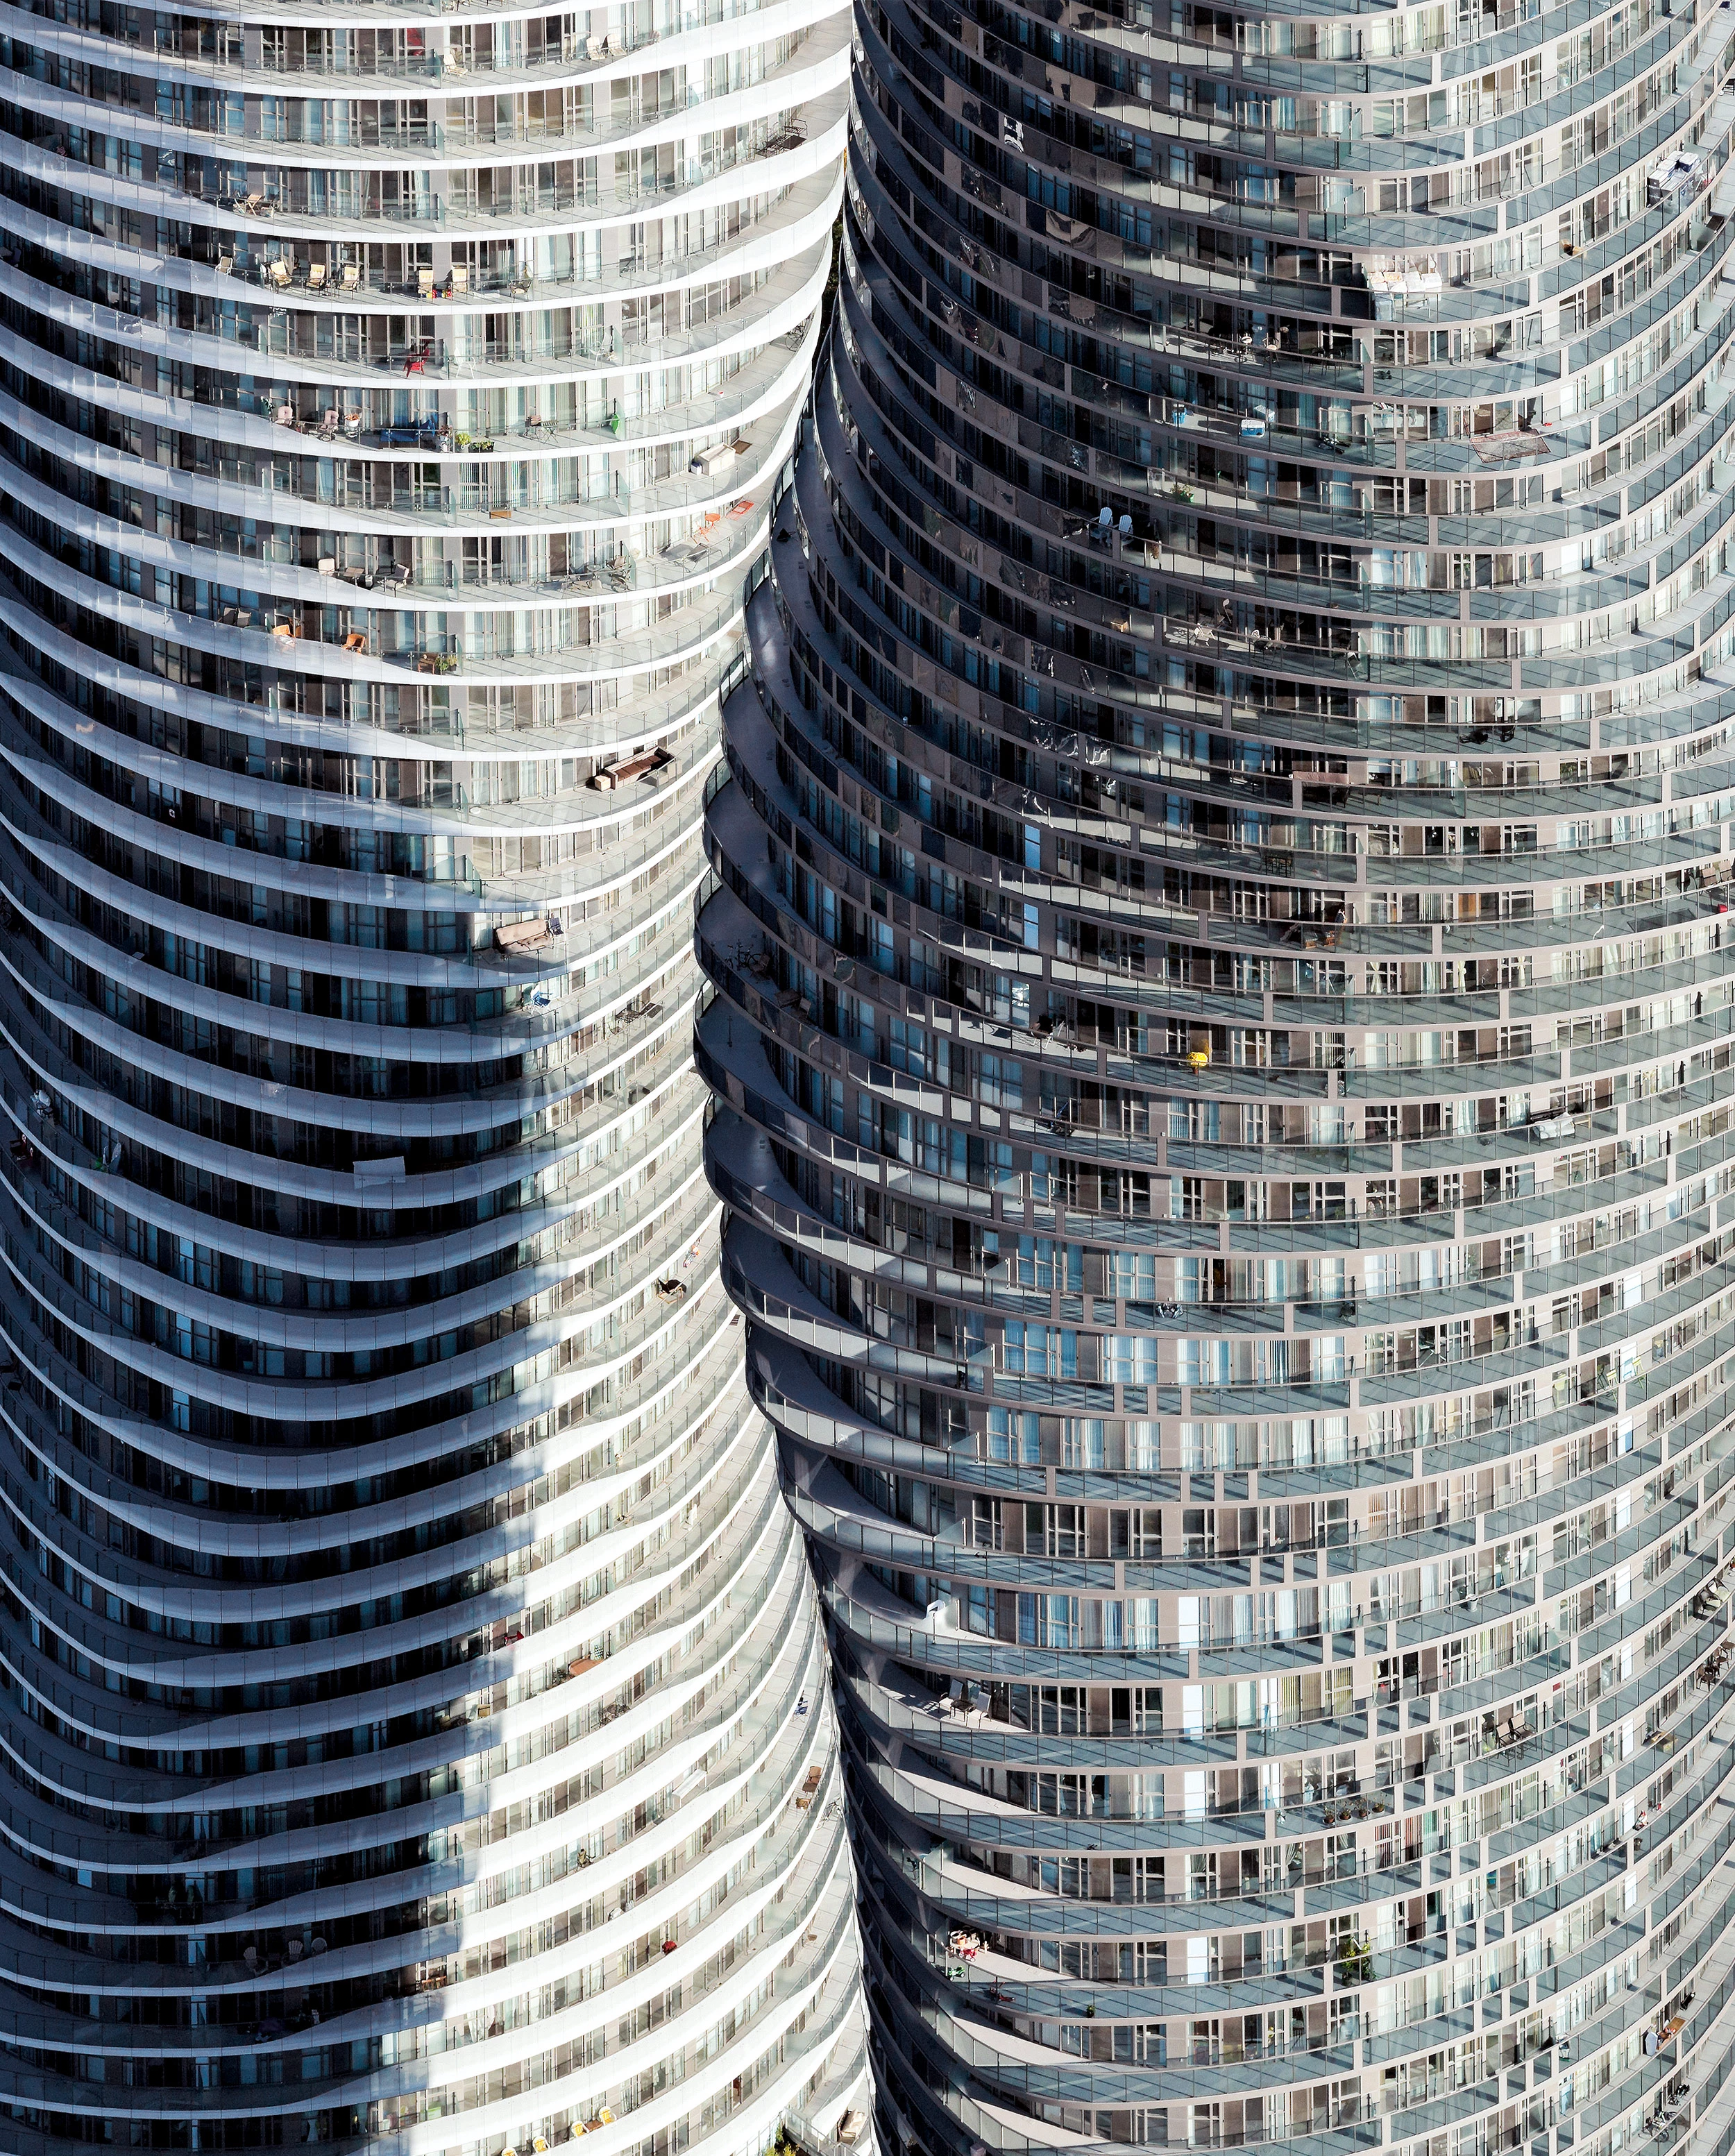 Absolute Towers in Mississauga